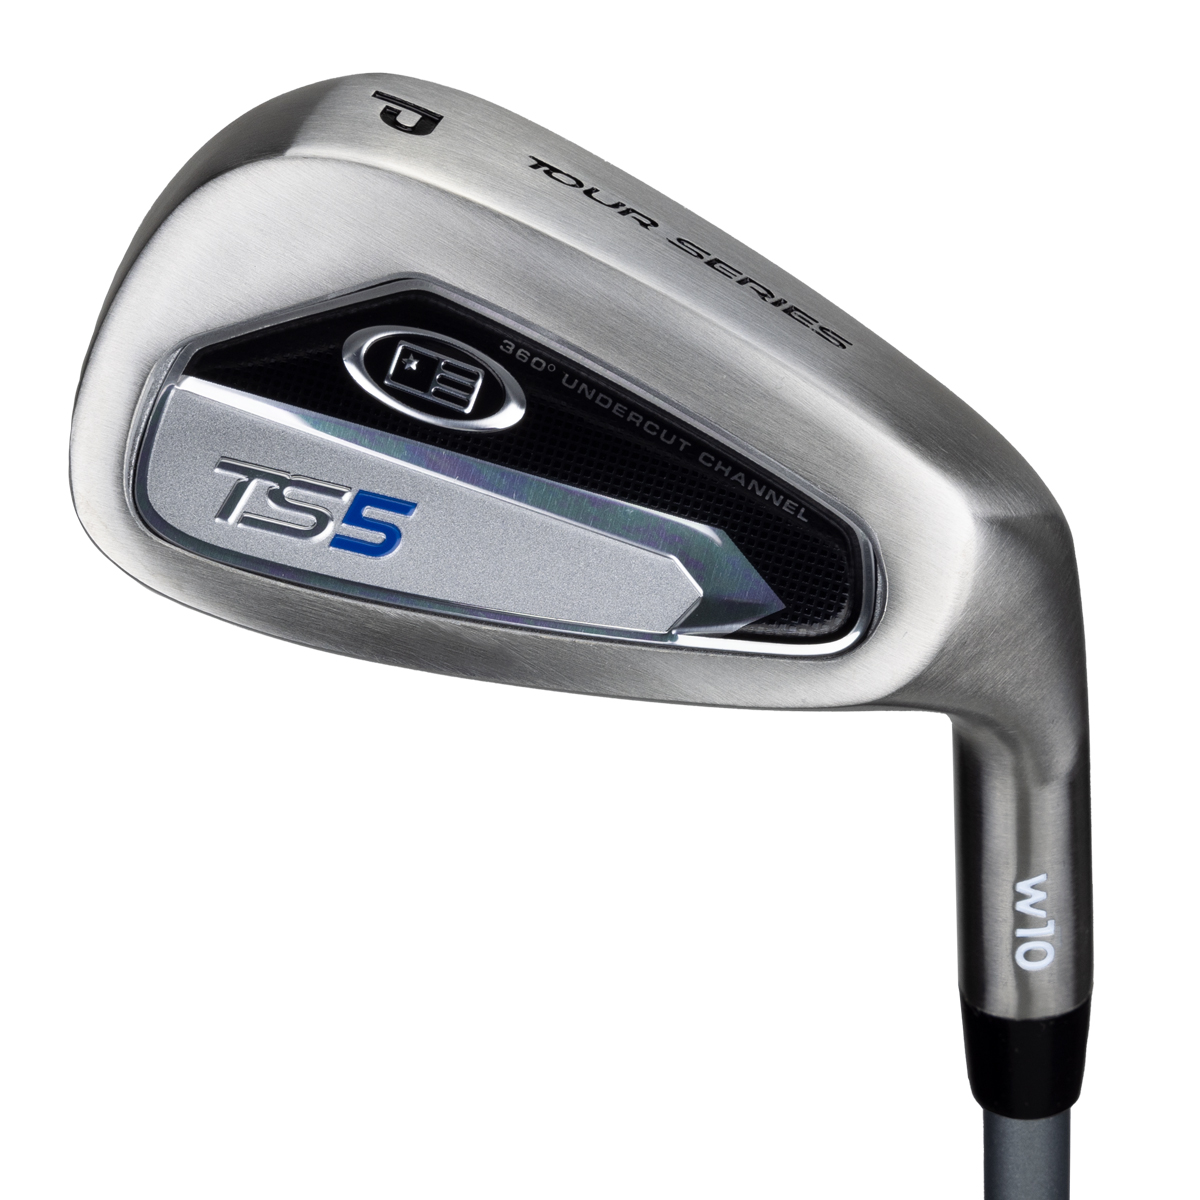 TS5-54  Pitching Wedge, w10 Graphite Shaft